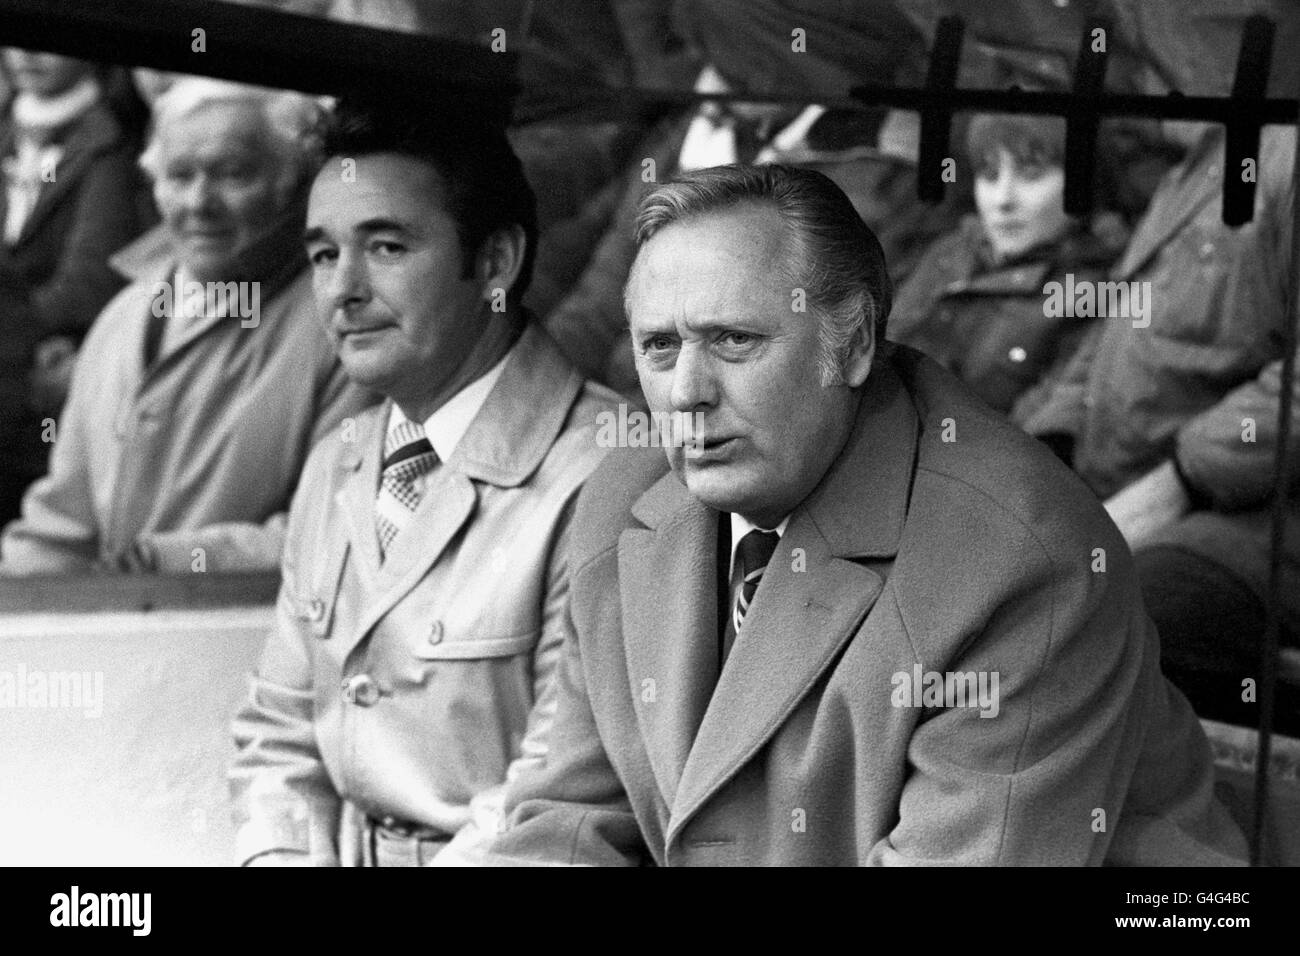 Brian Clough, left, manager of League leaders Nottingham Forest, and assistant manager Peter Taylor watching their men in action against Leeds United at Elland Road, the ground where Clough once had a brief and stormy reign as manager. Stock Photo